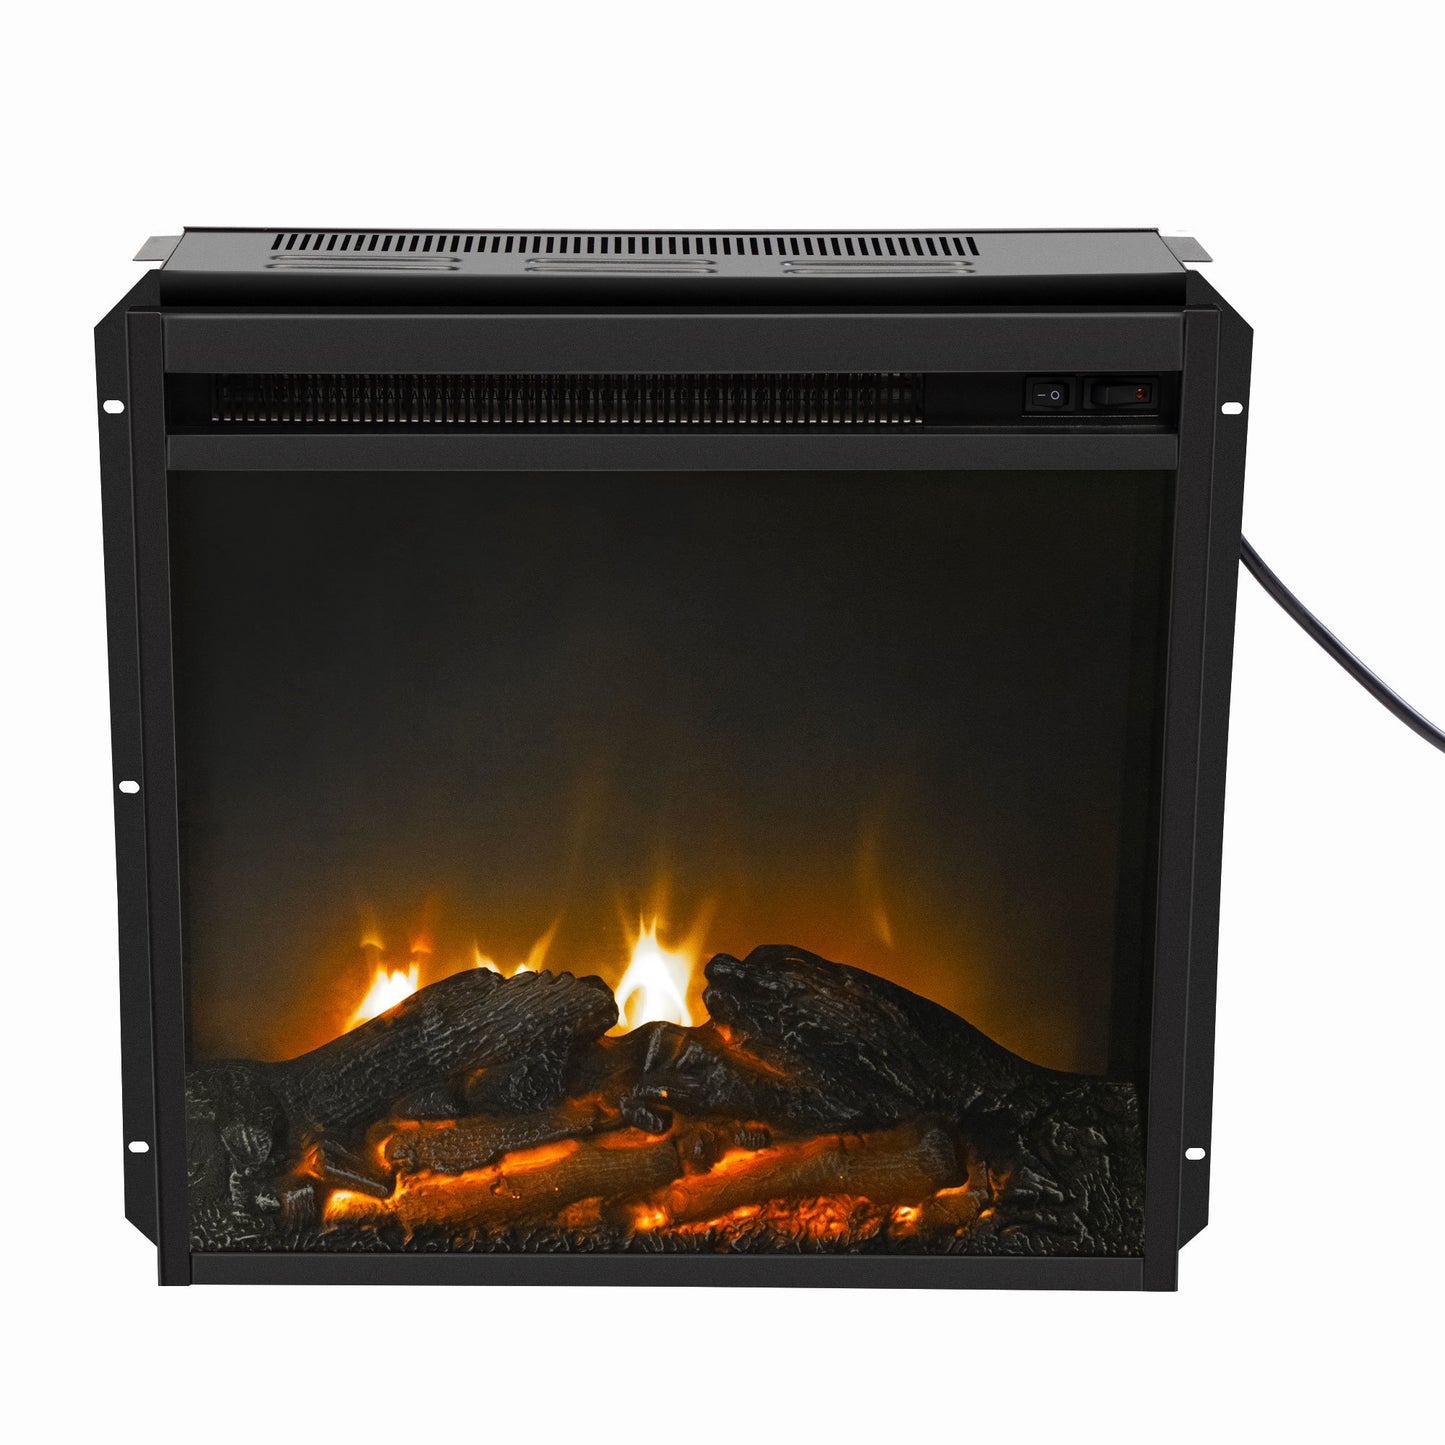 18" Freestanding & Recessed Electric Fireplace Insert Heater